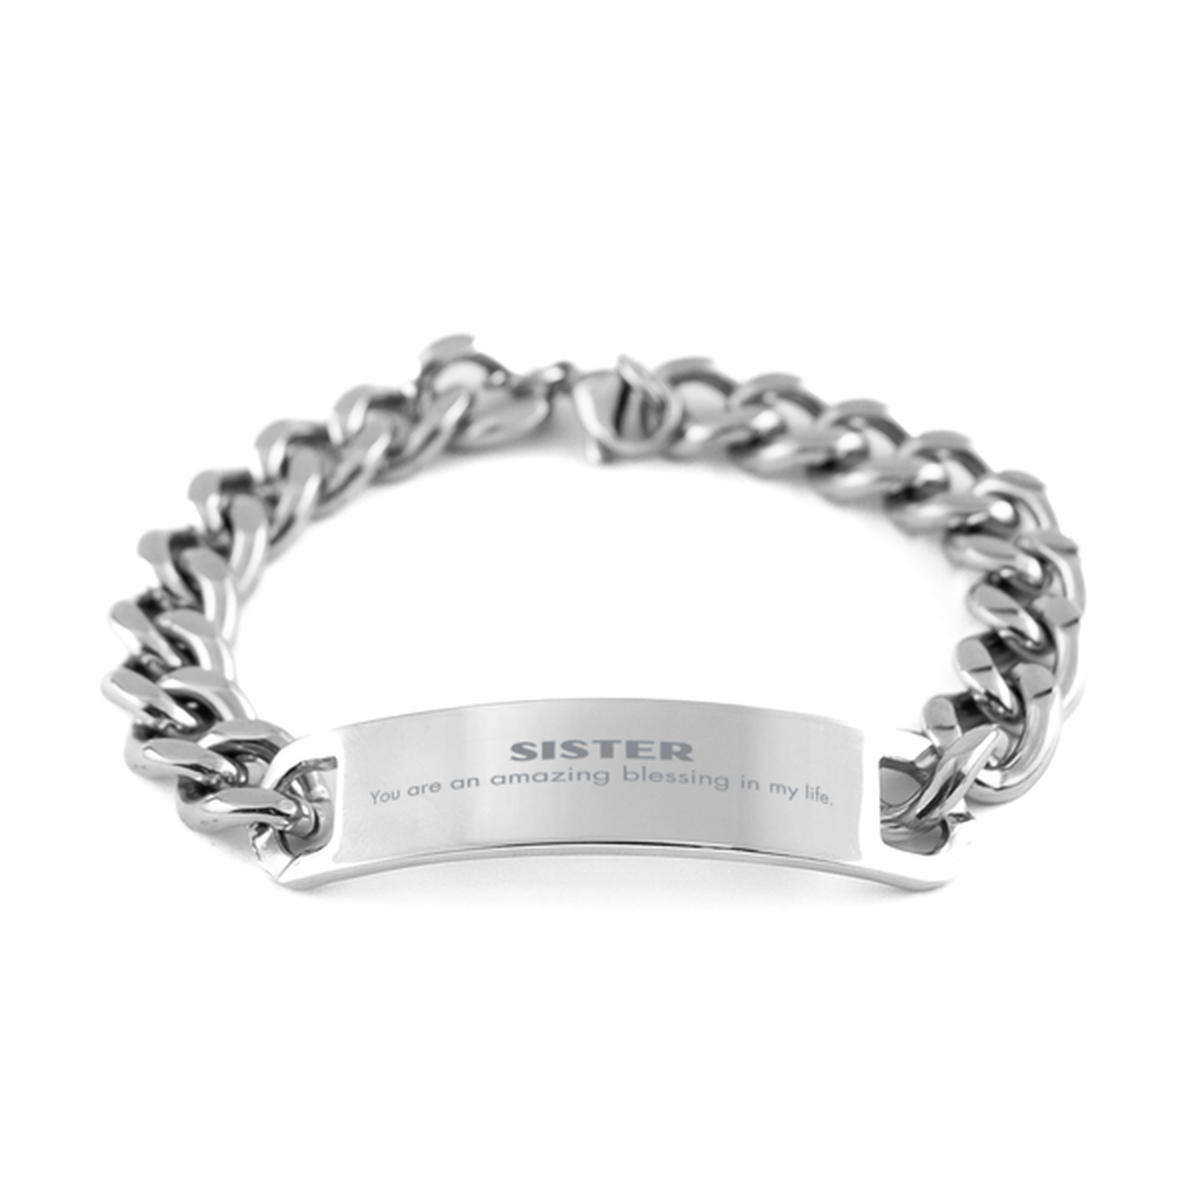 Sister Cuban Chain Stainless Steel Bracelet, You are an amazing blessing in my life, Thank You Gifts For Sister, Inspirational Birthday Christmas Unique Gifts For Sister